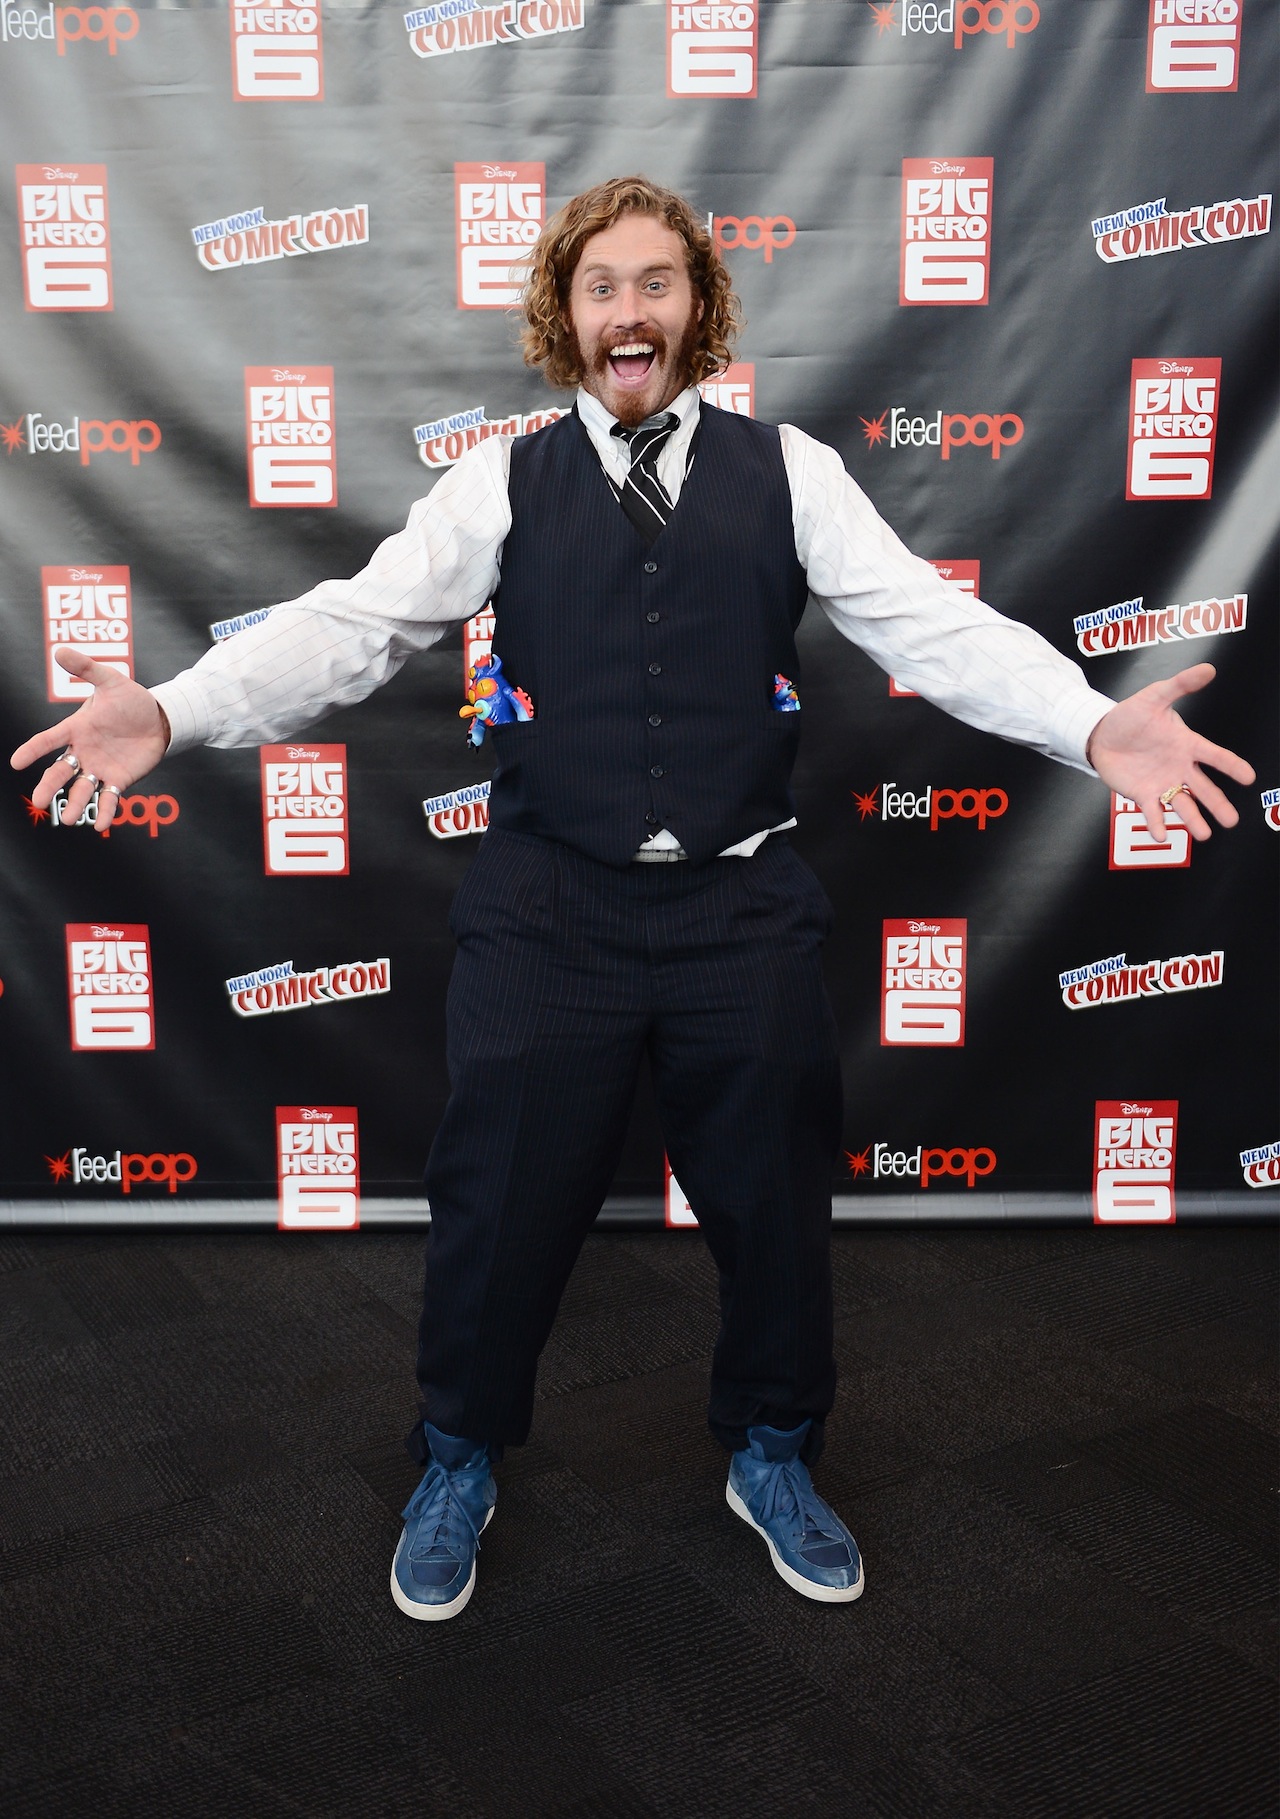 NEW YORK, NY - OCTOBER 09:  Actor T.J. Miller attends Walt Disney Studios' 2014 New York Comic Con presentations of "Big Hero 6" and "Tomorrowland" at the Javits Convention Center on Thursday October 9, 2014 in New York City.  (Photo by Stephen Lovekin/Getty Images for Disney) *** Local Caption *** TJ Miller